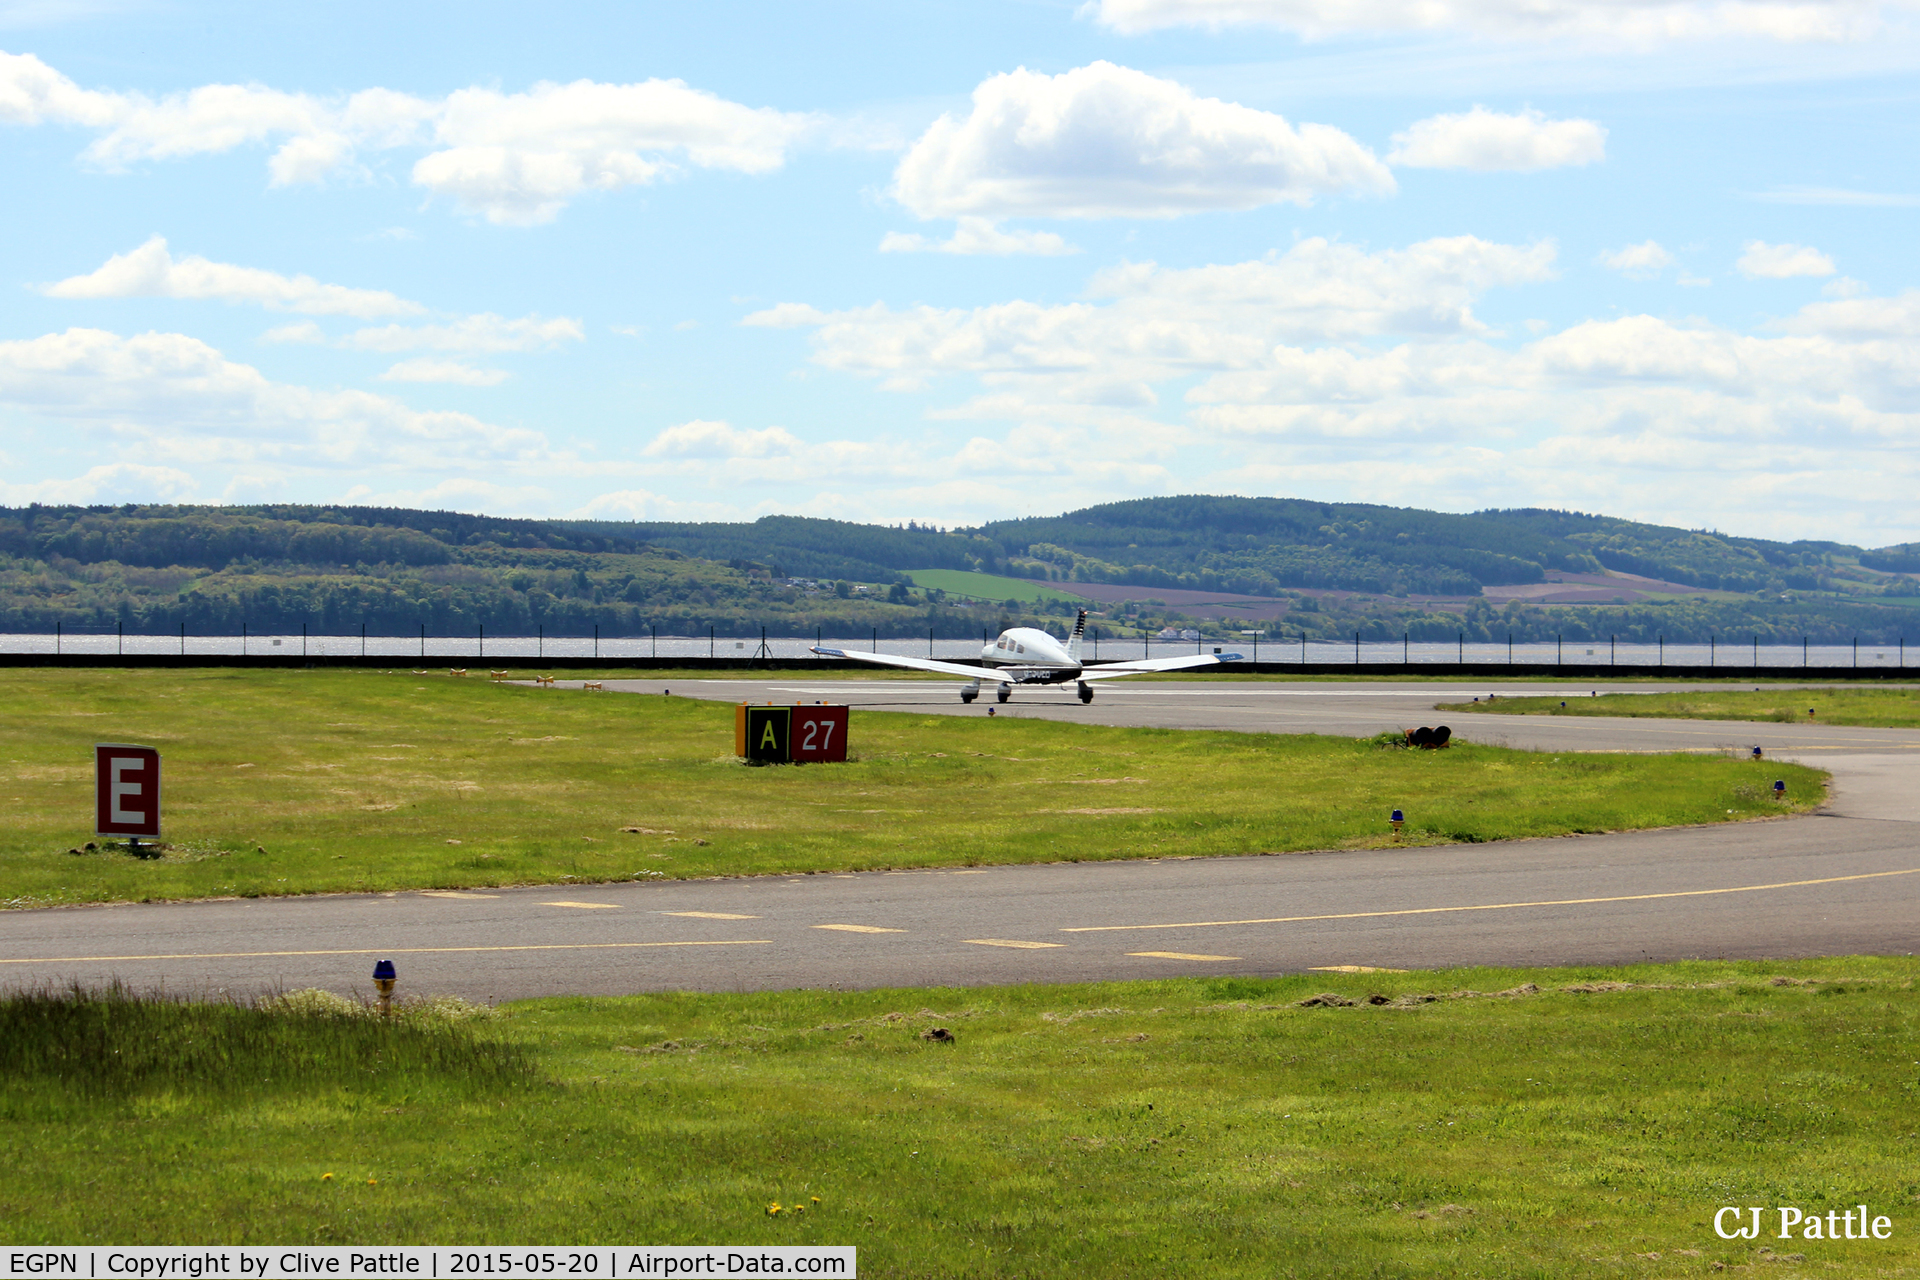 Dundee Airport, Dundee, Scotland United Kingdom (EGPN) - Hold for runway 27 at Dundee Riverside EGPN for departing PA-28 G-SUEB.